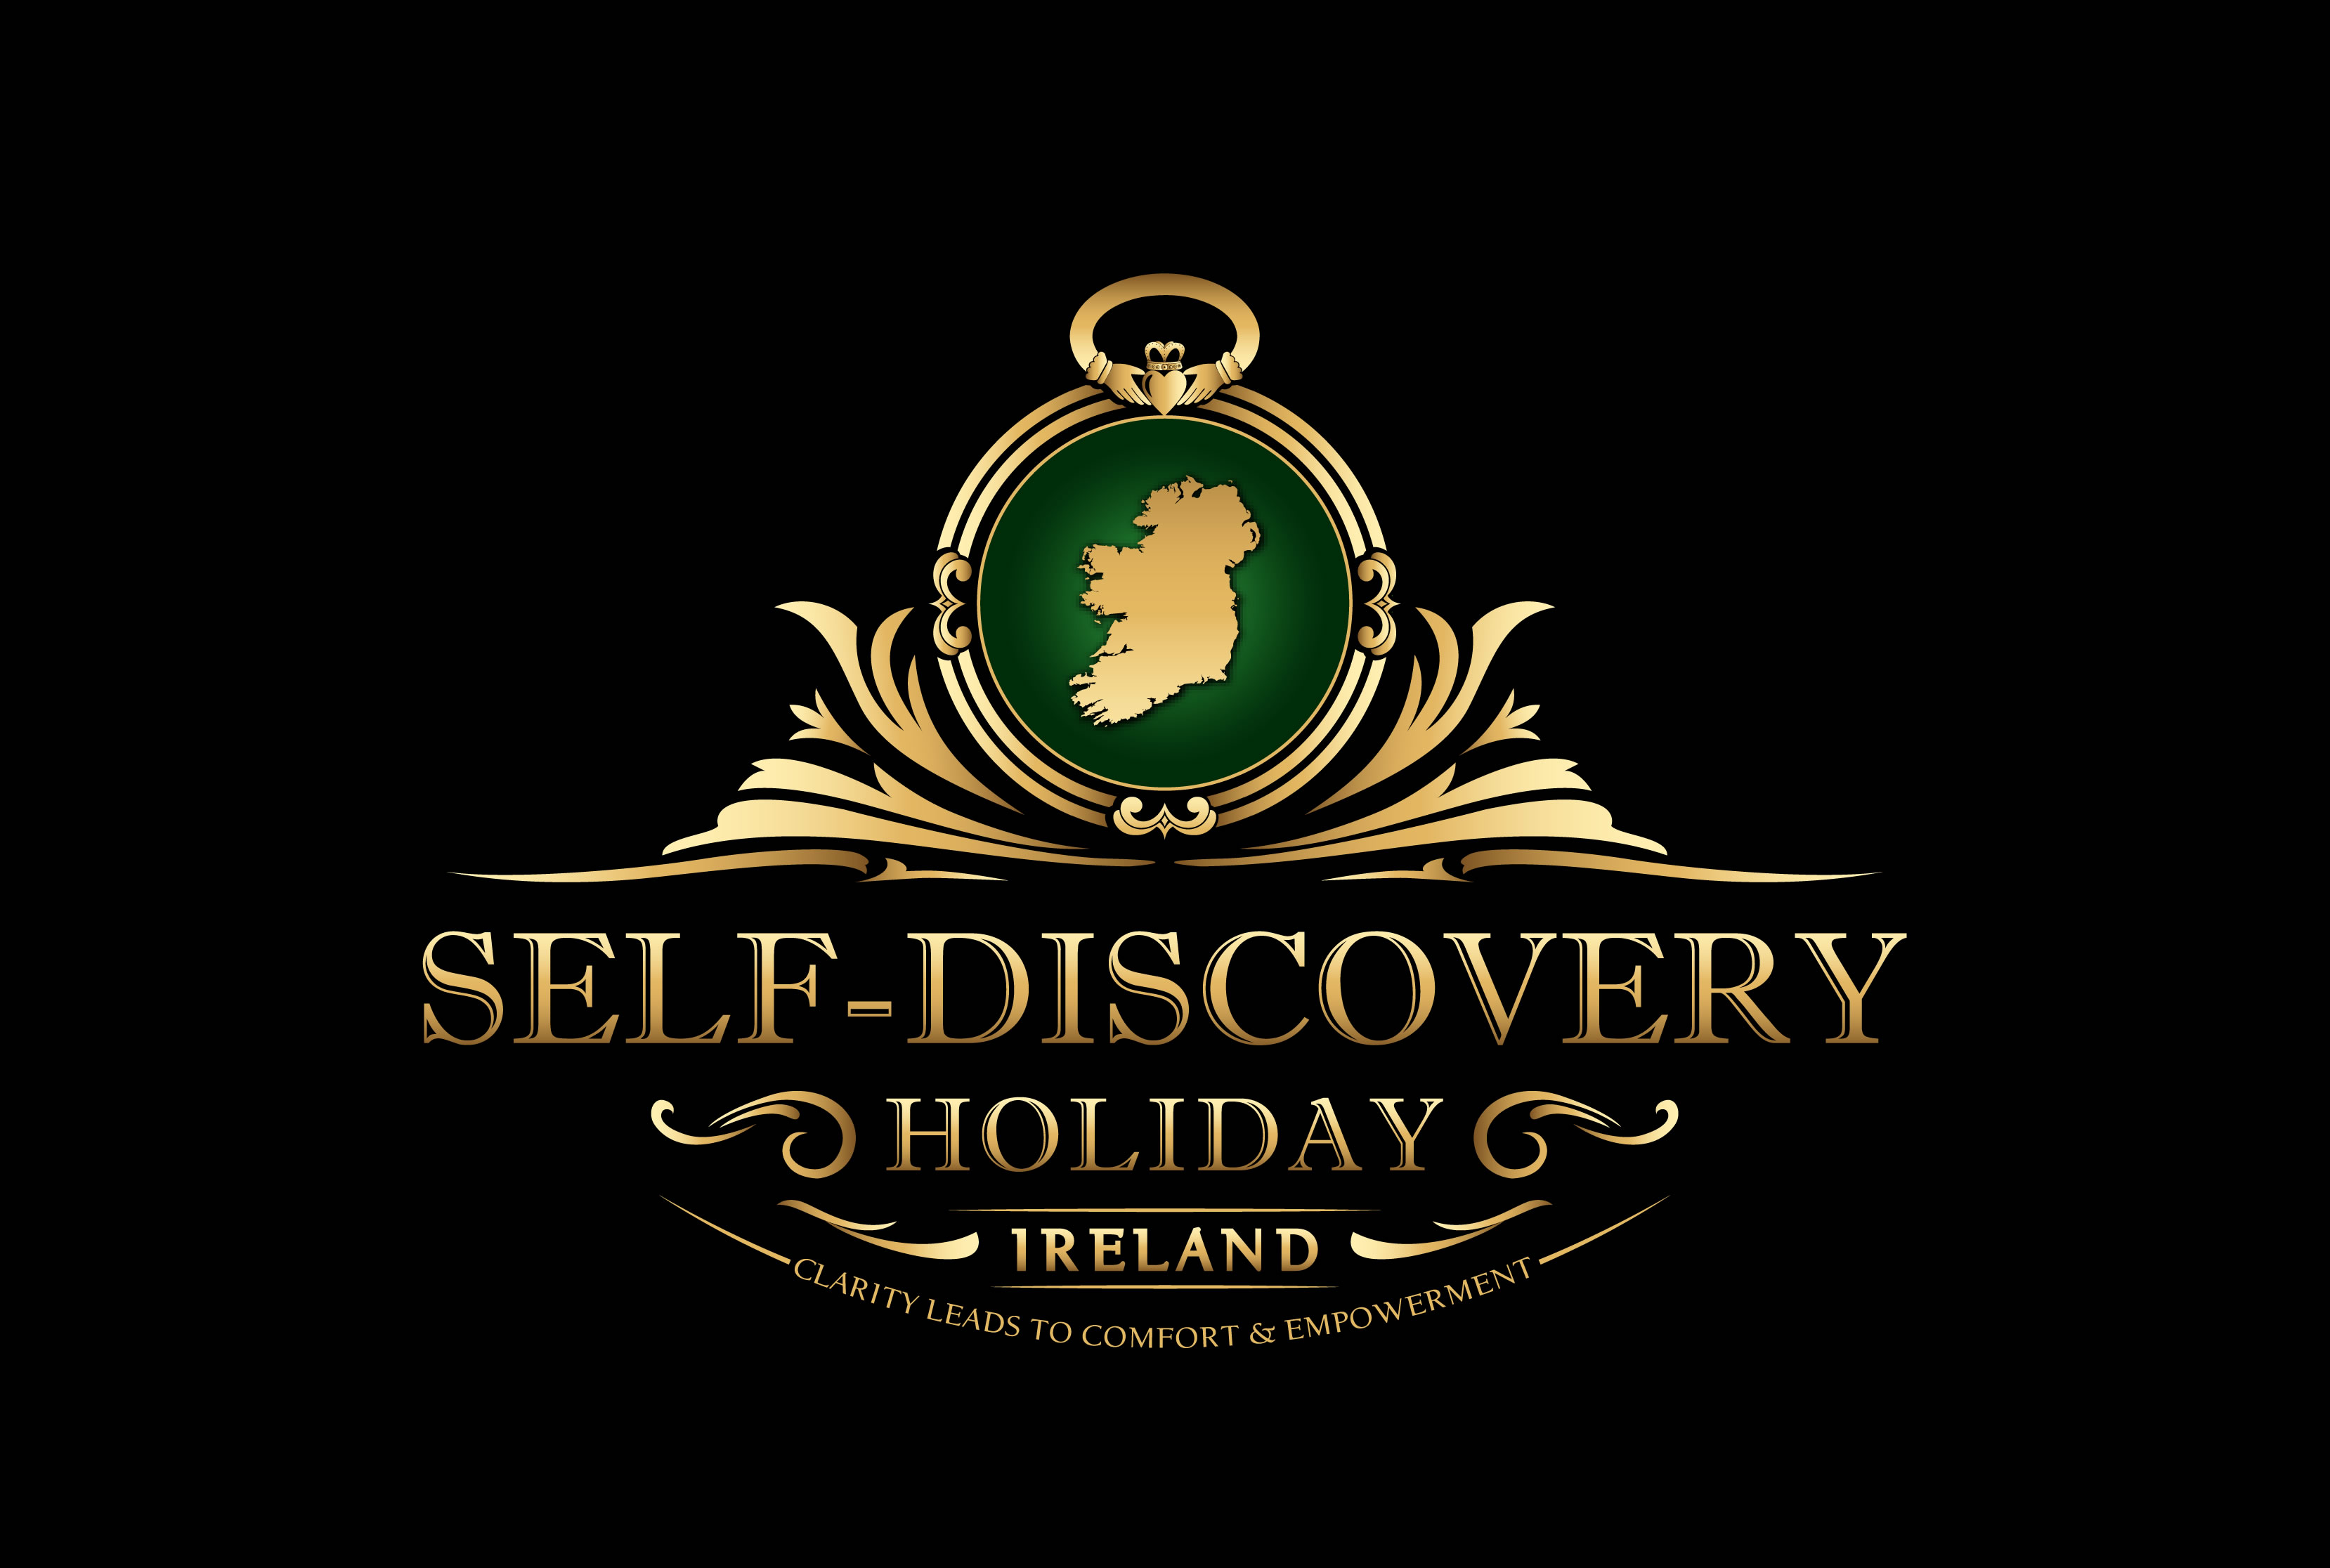 Lovers of Ireland .... Welcome .... Come on a Self Discovery Holiday to Ireland